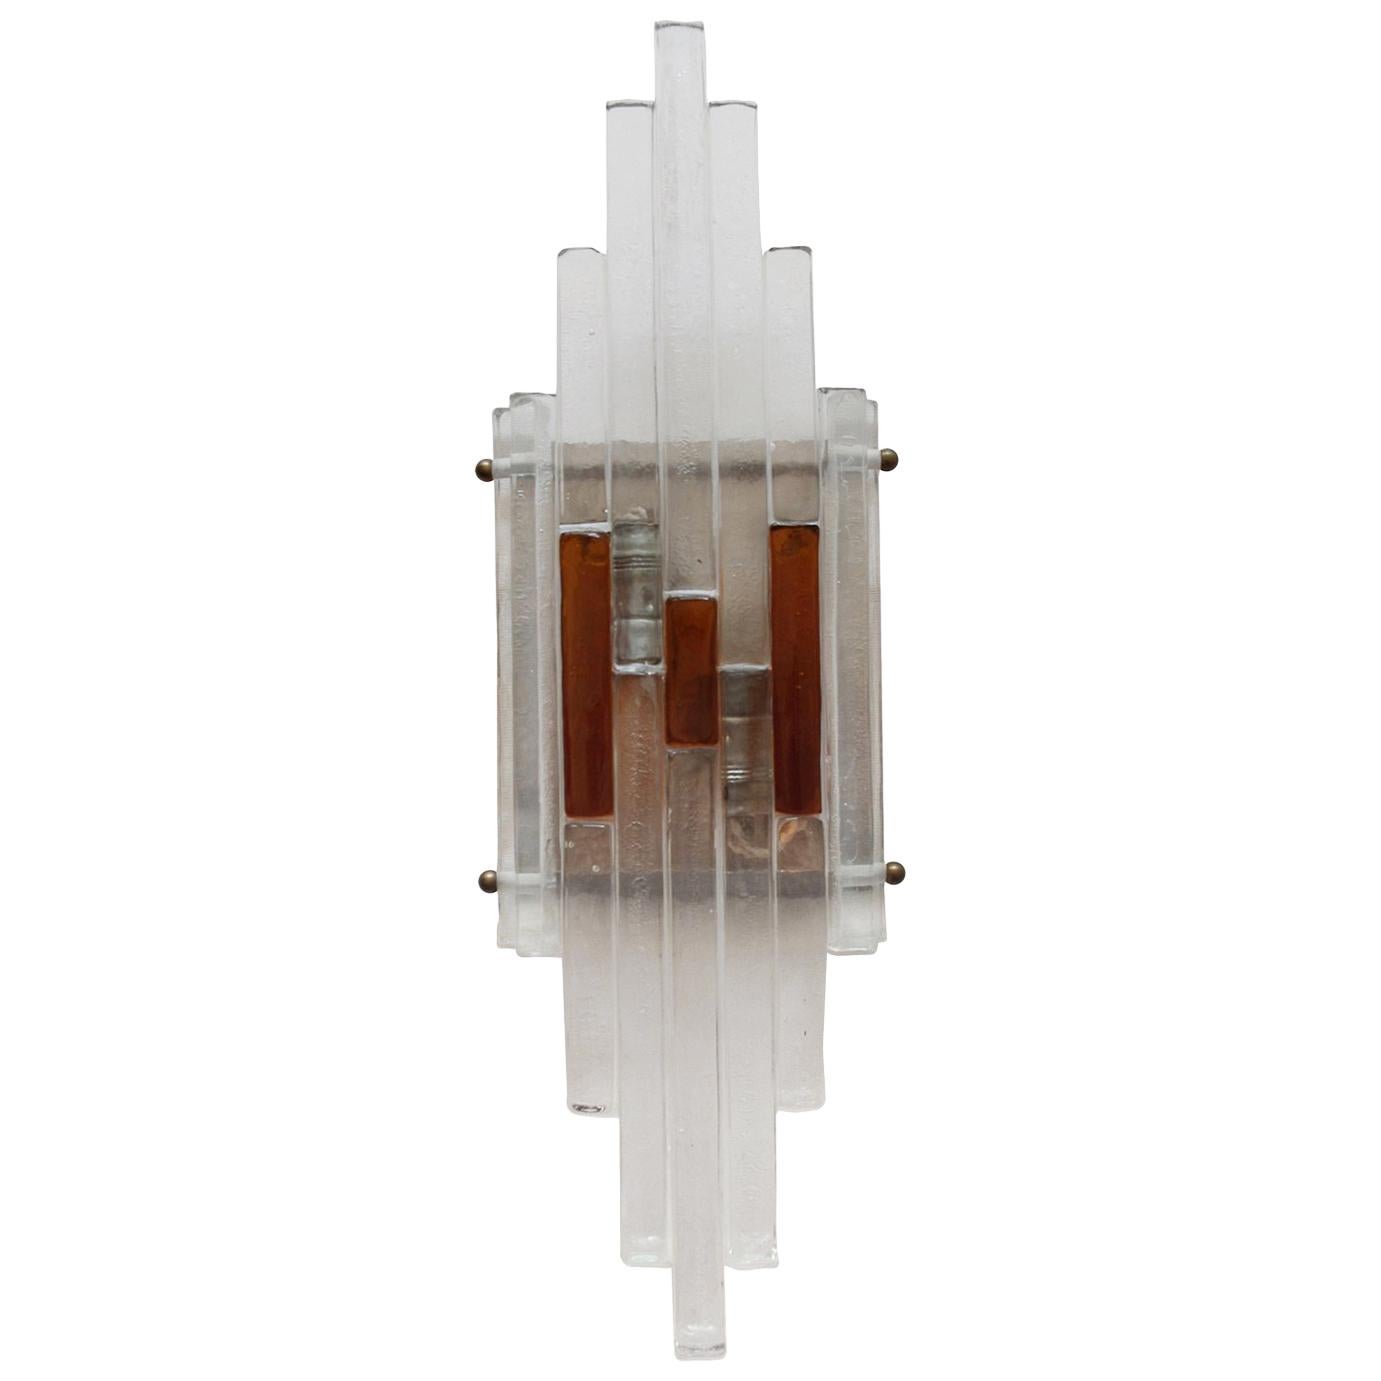 Italian Vintage Sculptural Murano Glass Wall Flush Mount Sconce, 1960s For Sale